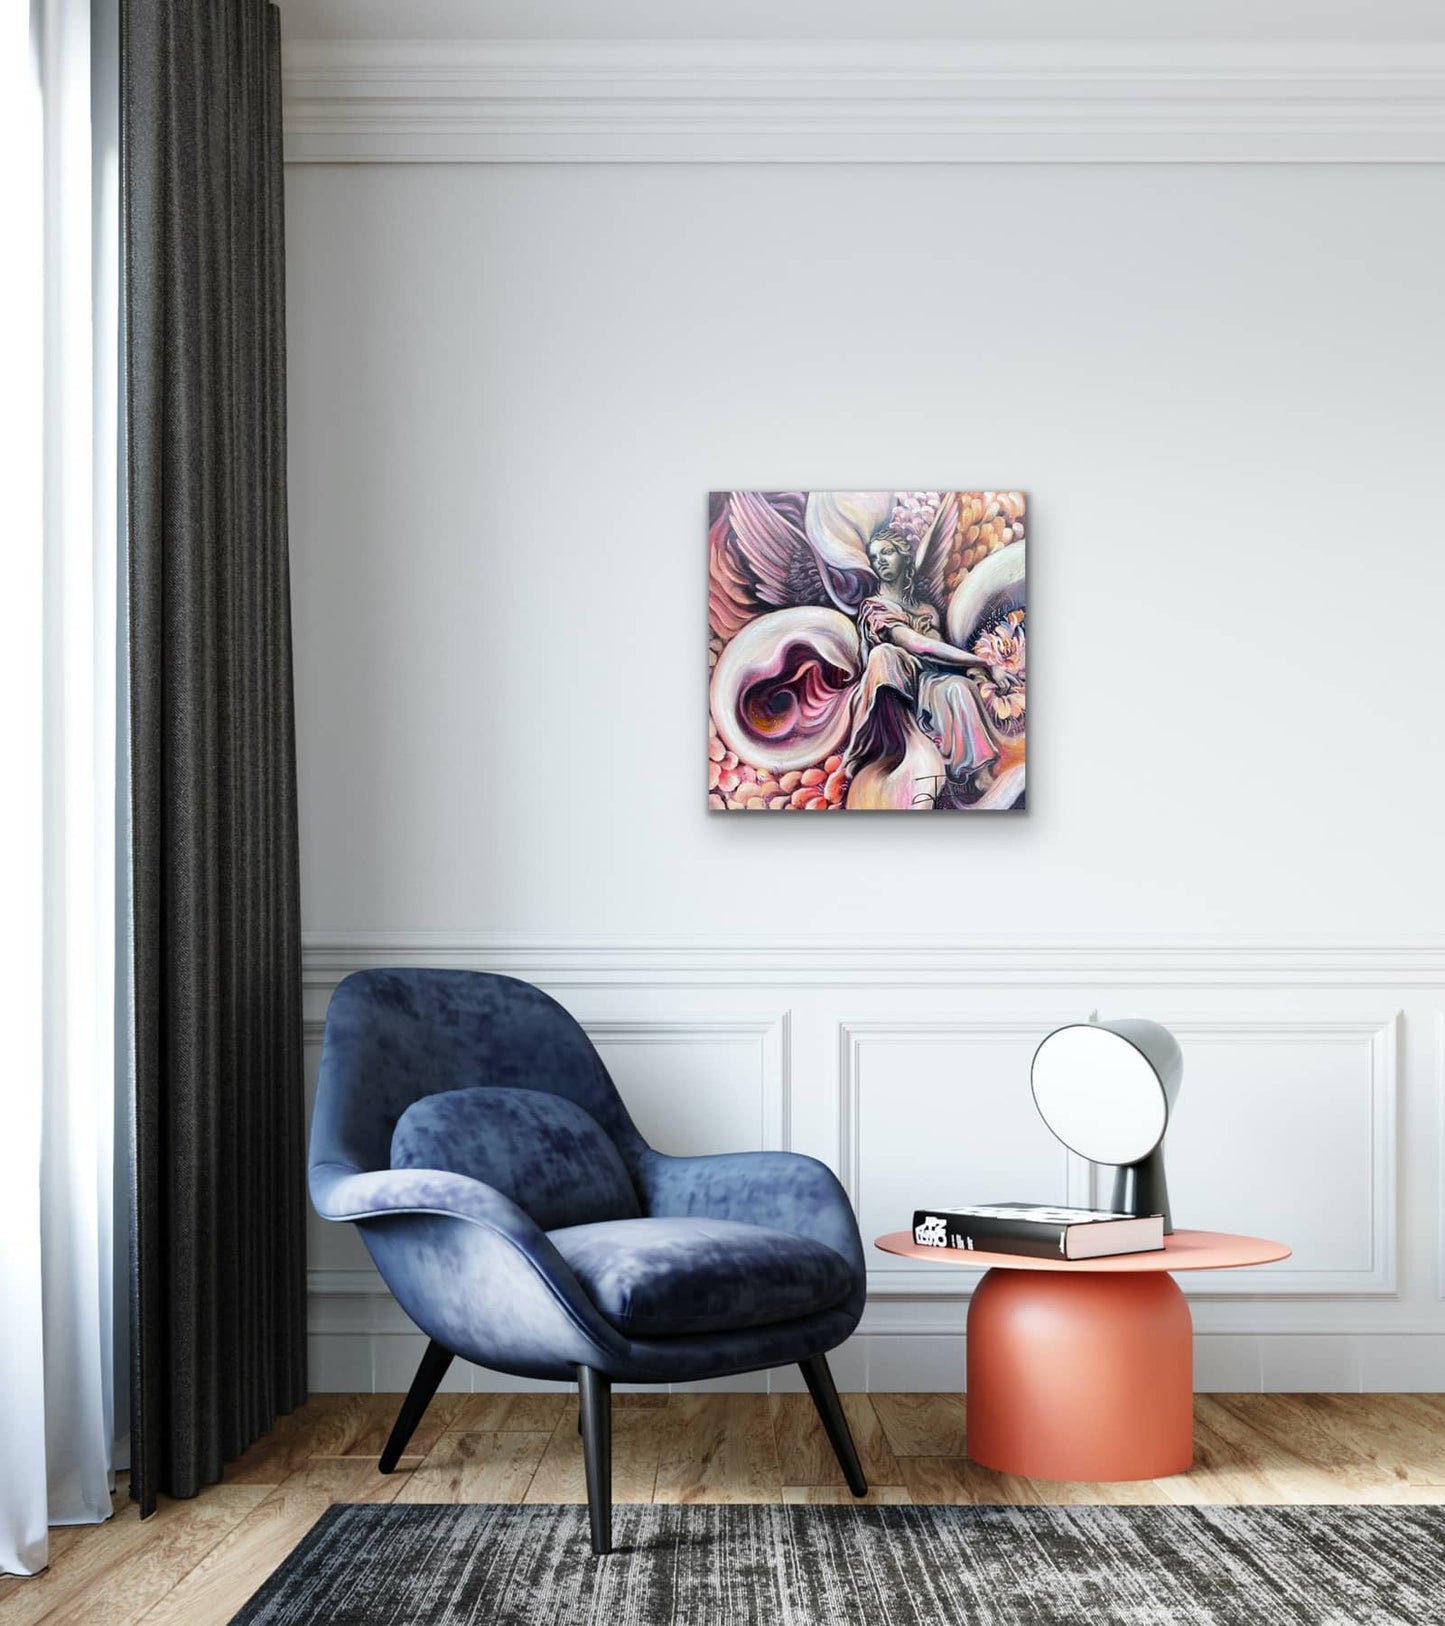 Square art, angel, angel, petals, hall art, wall art, home decor, artwork in the home